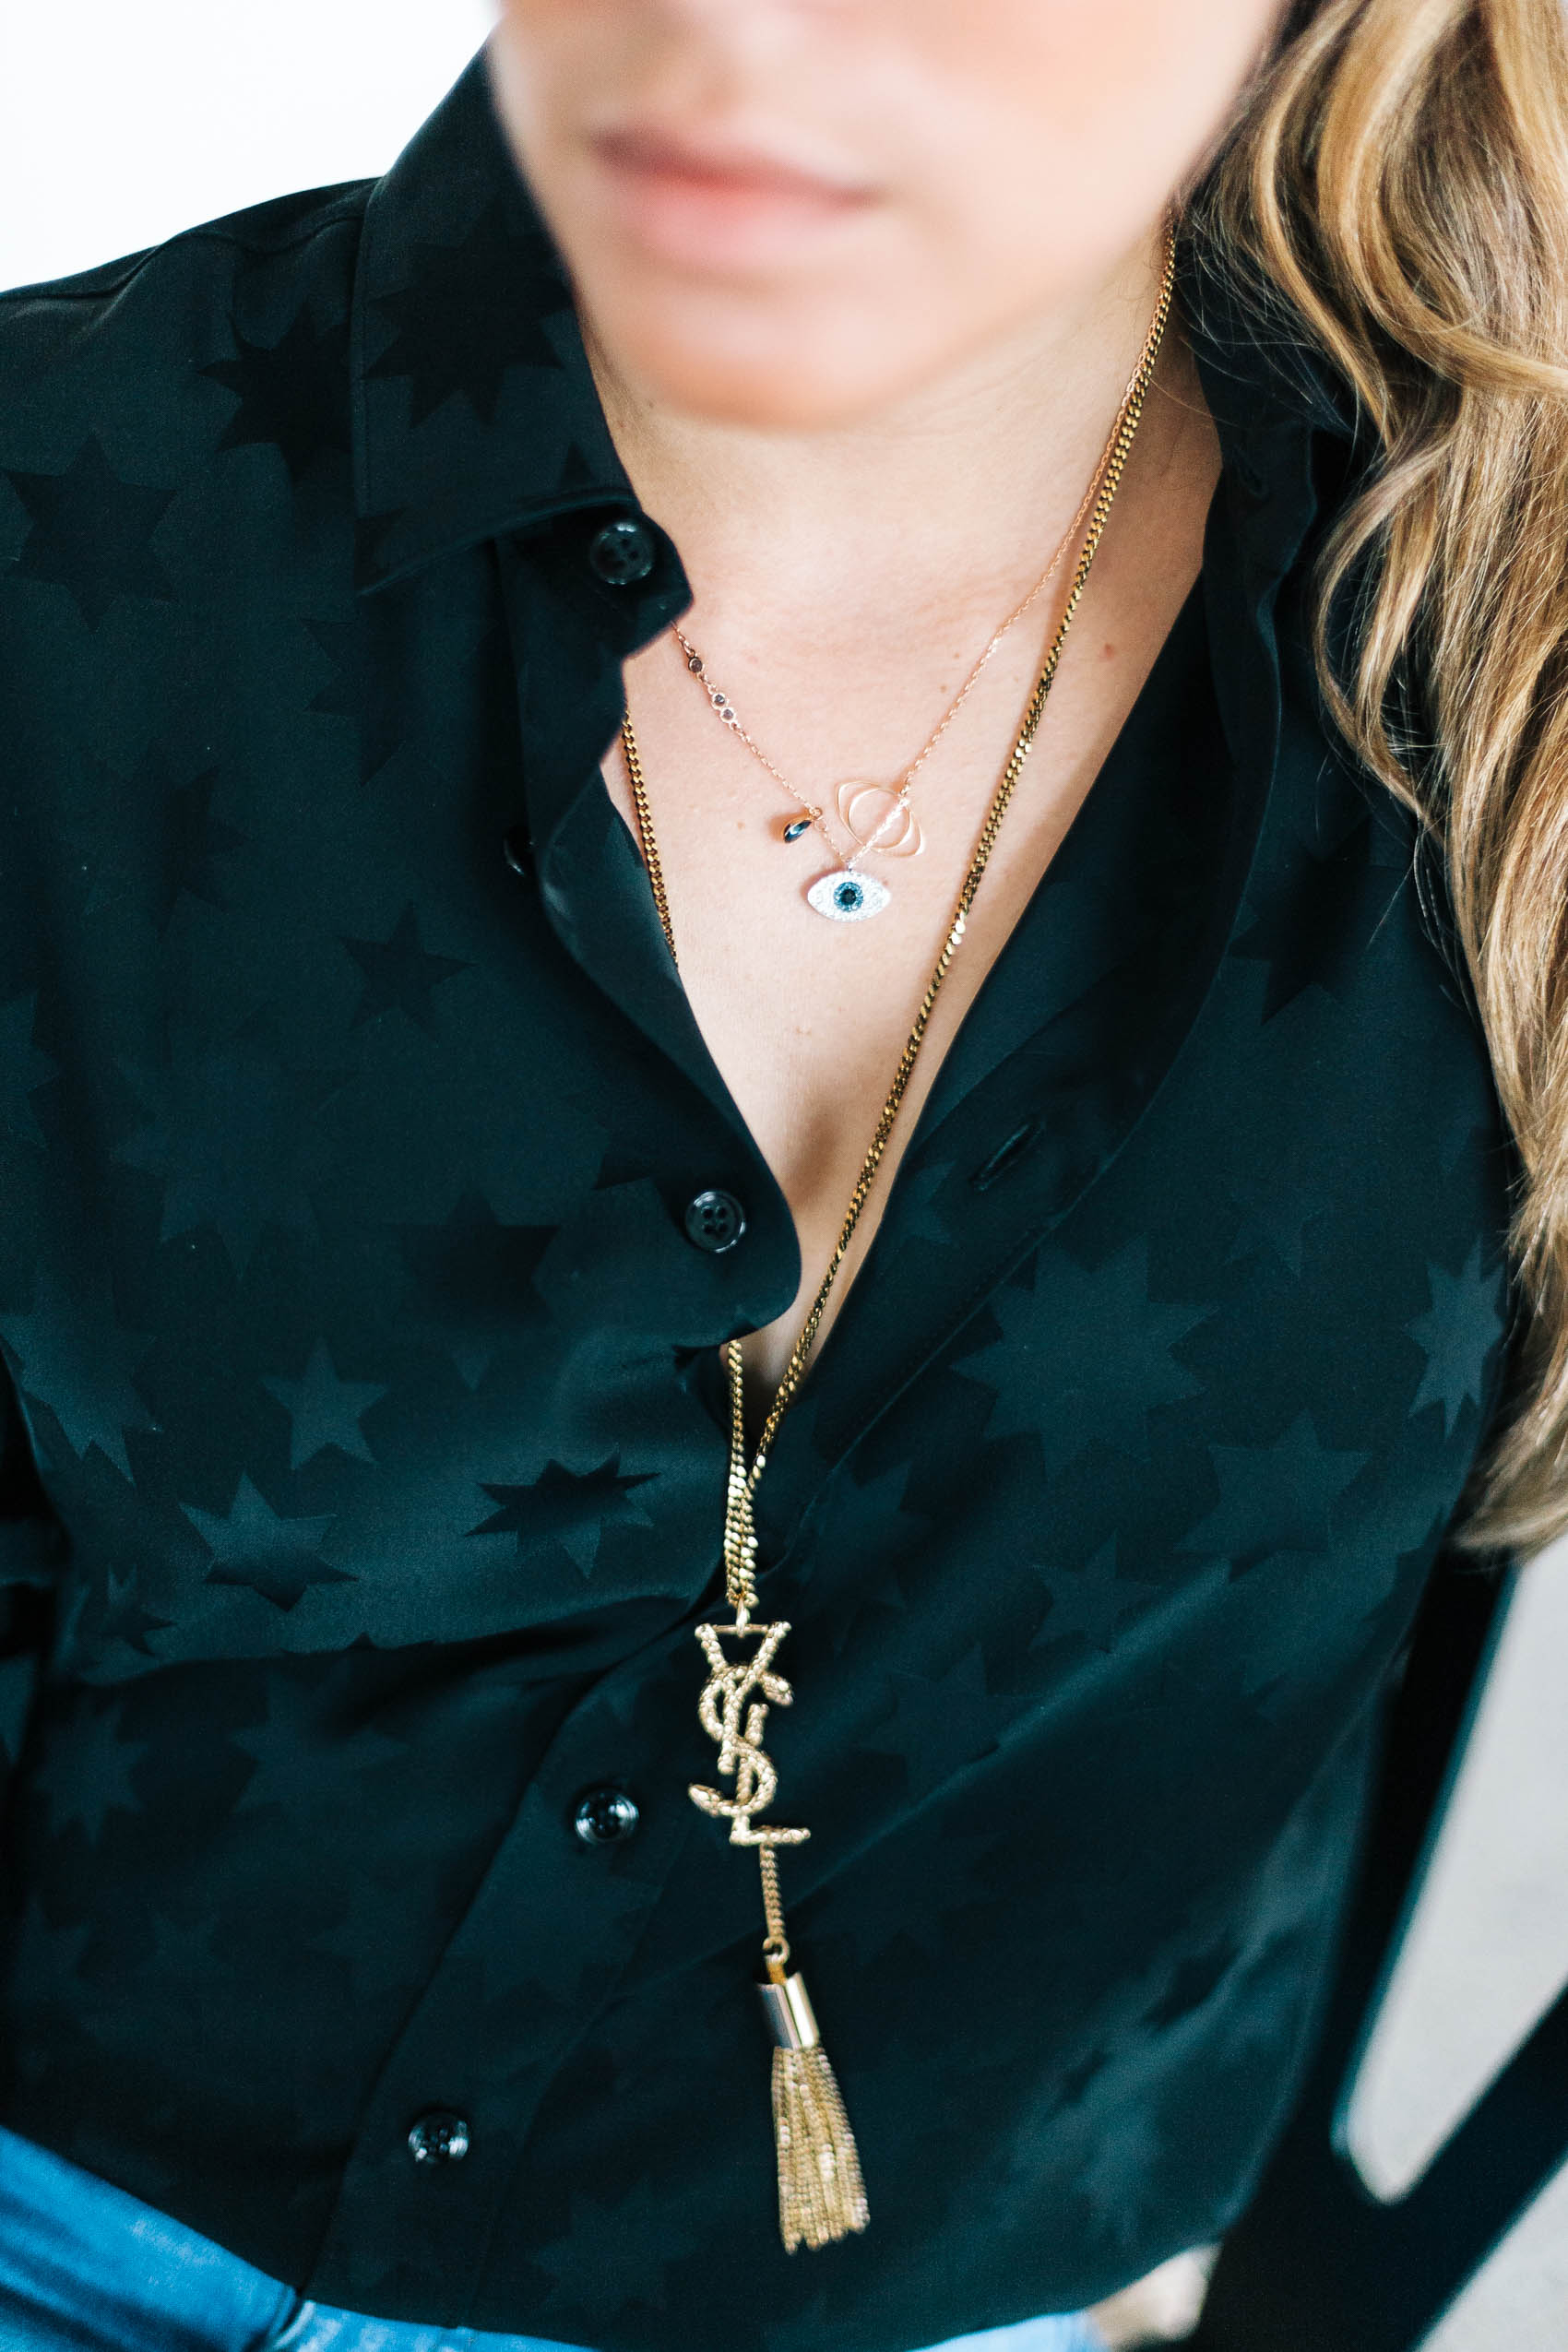 Swarovski by Miranda Kerr evil eye necklace layered with a long gold chain necklace from Saint Laurent with the Cassandre logo in snake and tassel